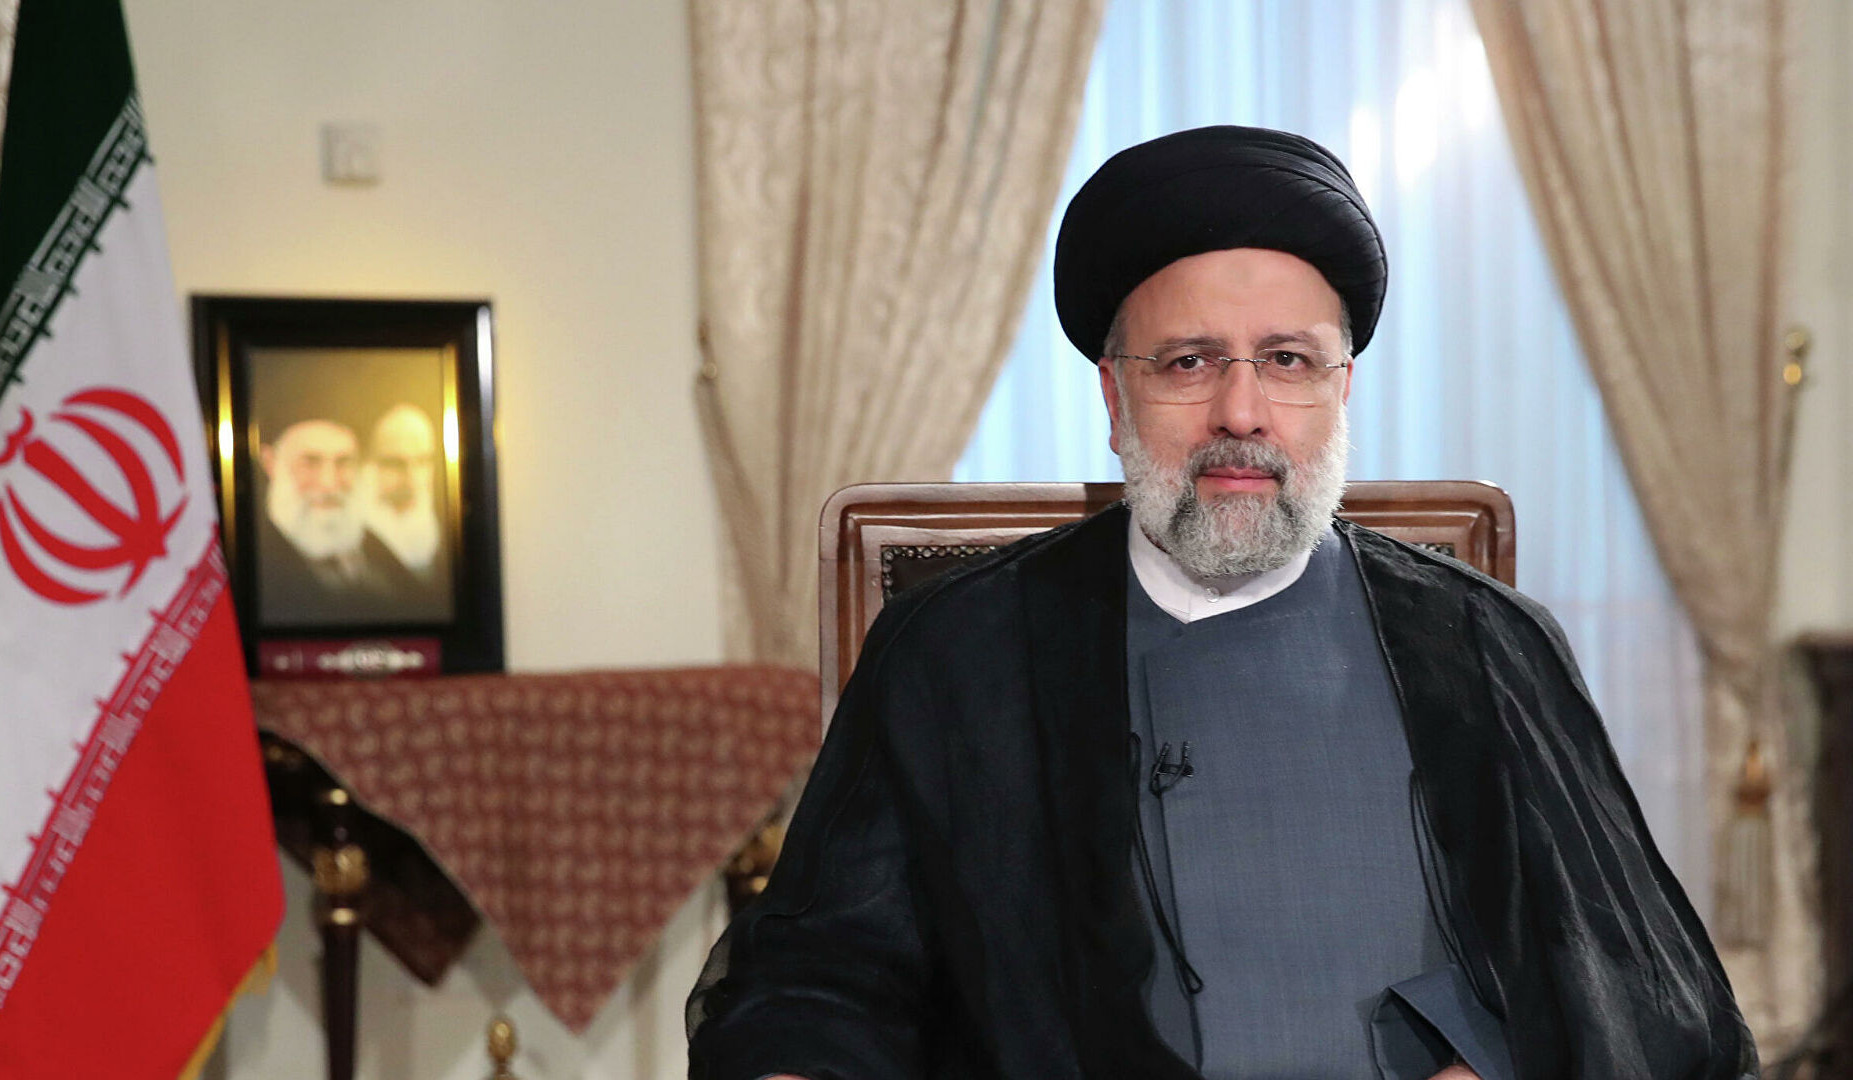 Any change of borders in region is unacceptable: Raisi